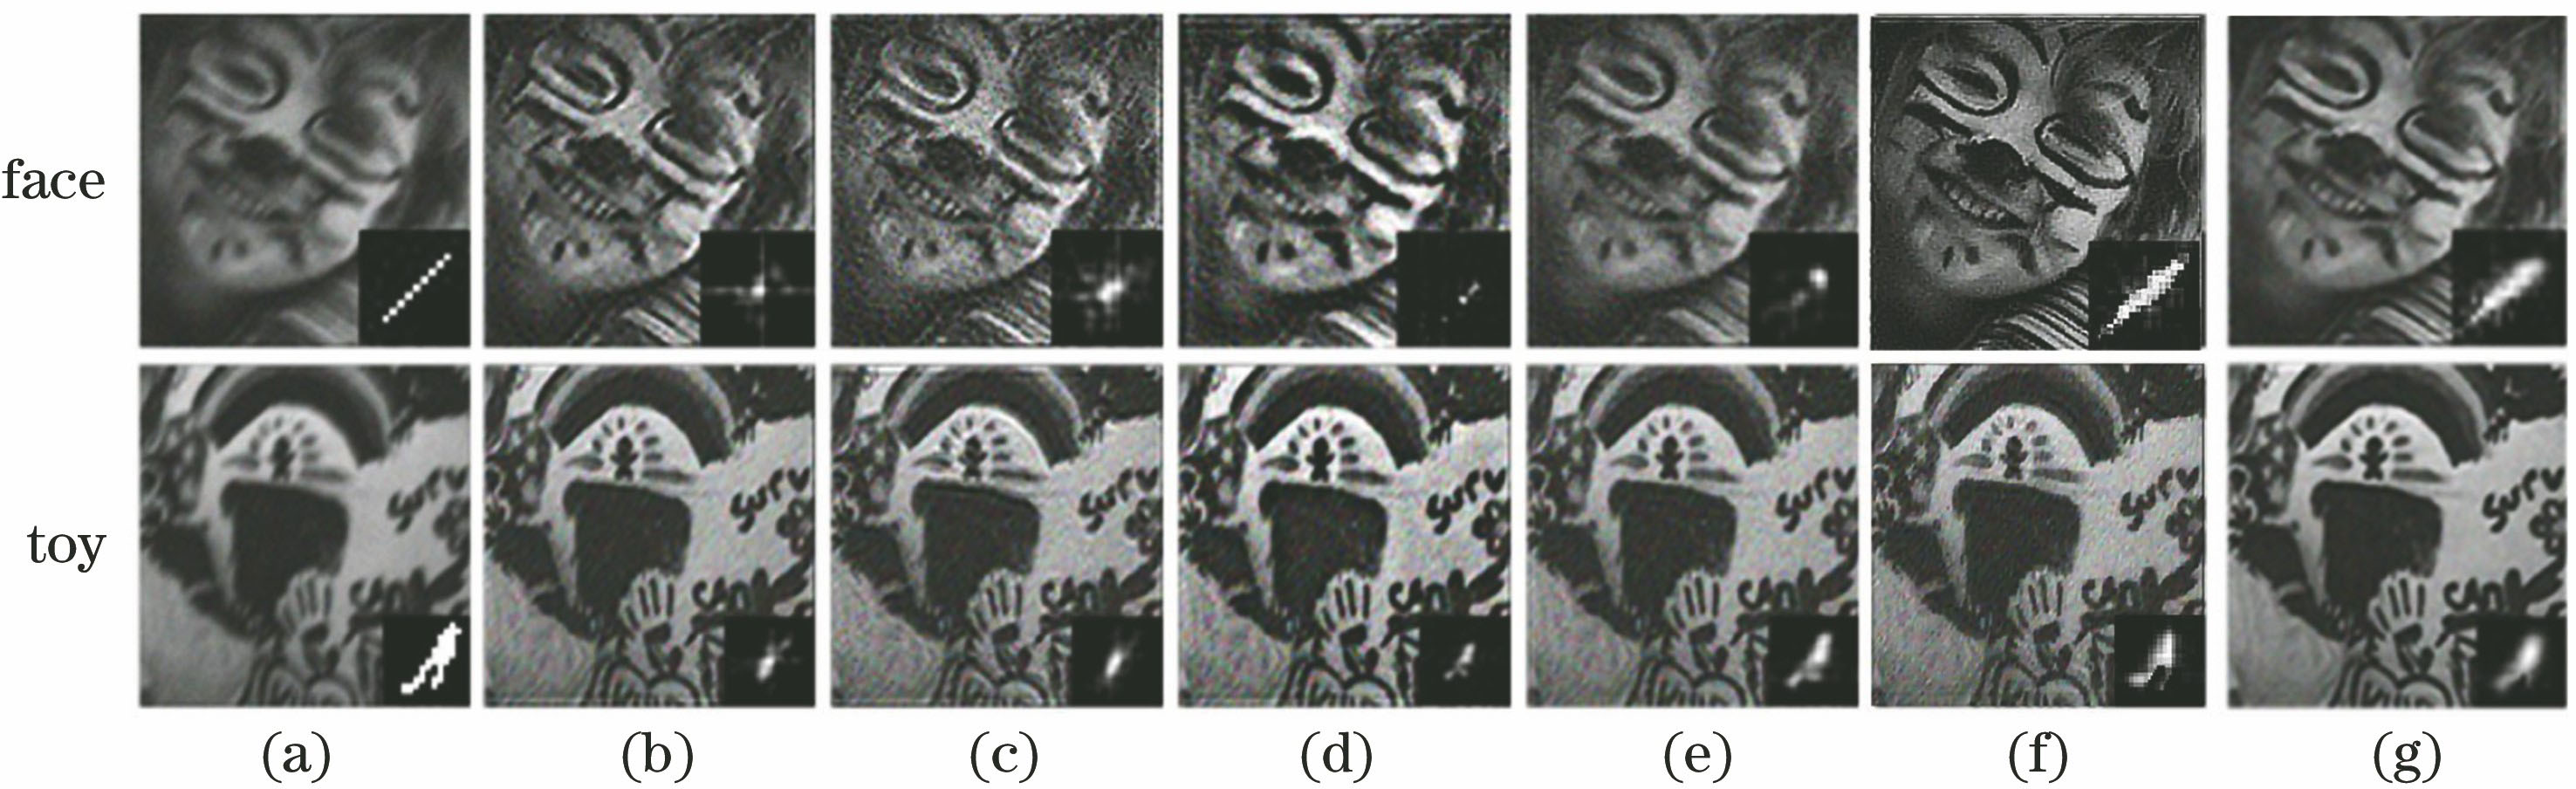 Qualitative comparison of restoration results for simulated blurred images (σ=3%). (a) Blurred image; (b) algorithm in Ref. [7]; (c) algorithm in Ref. [8]; (d) algorithm in Ref. [9]; (e) algorithm in Ref. [10]; (f) algorithm in Ref. [11]; (g) our algorithm